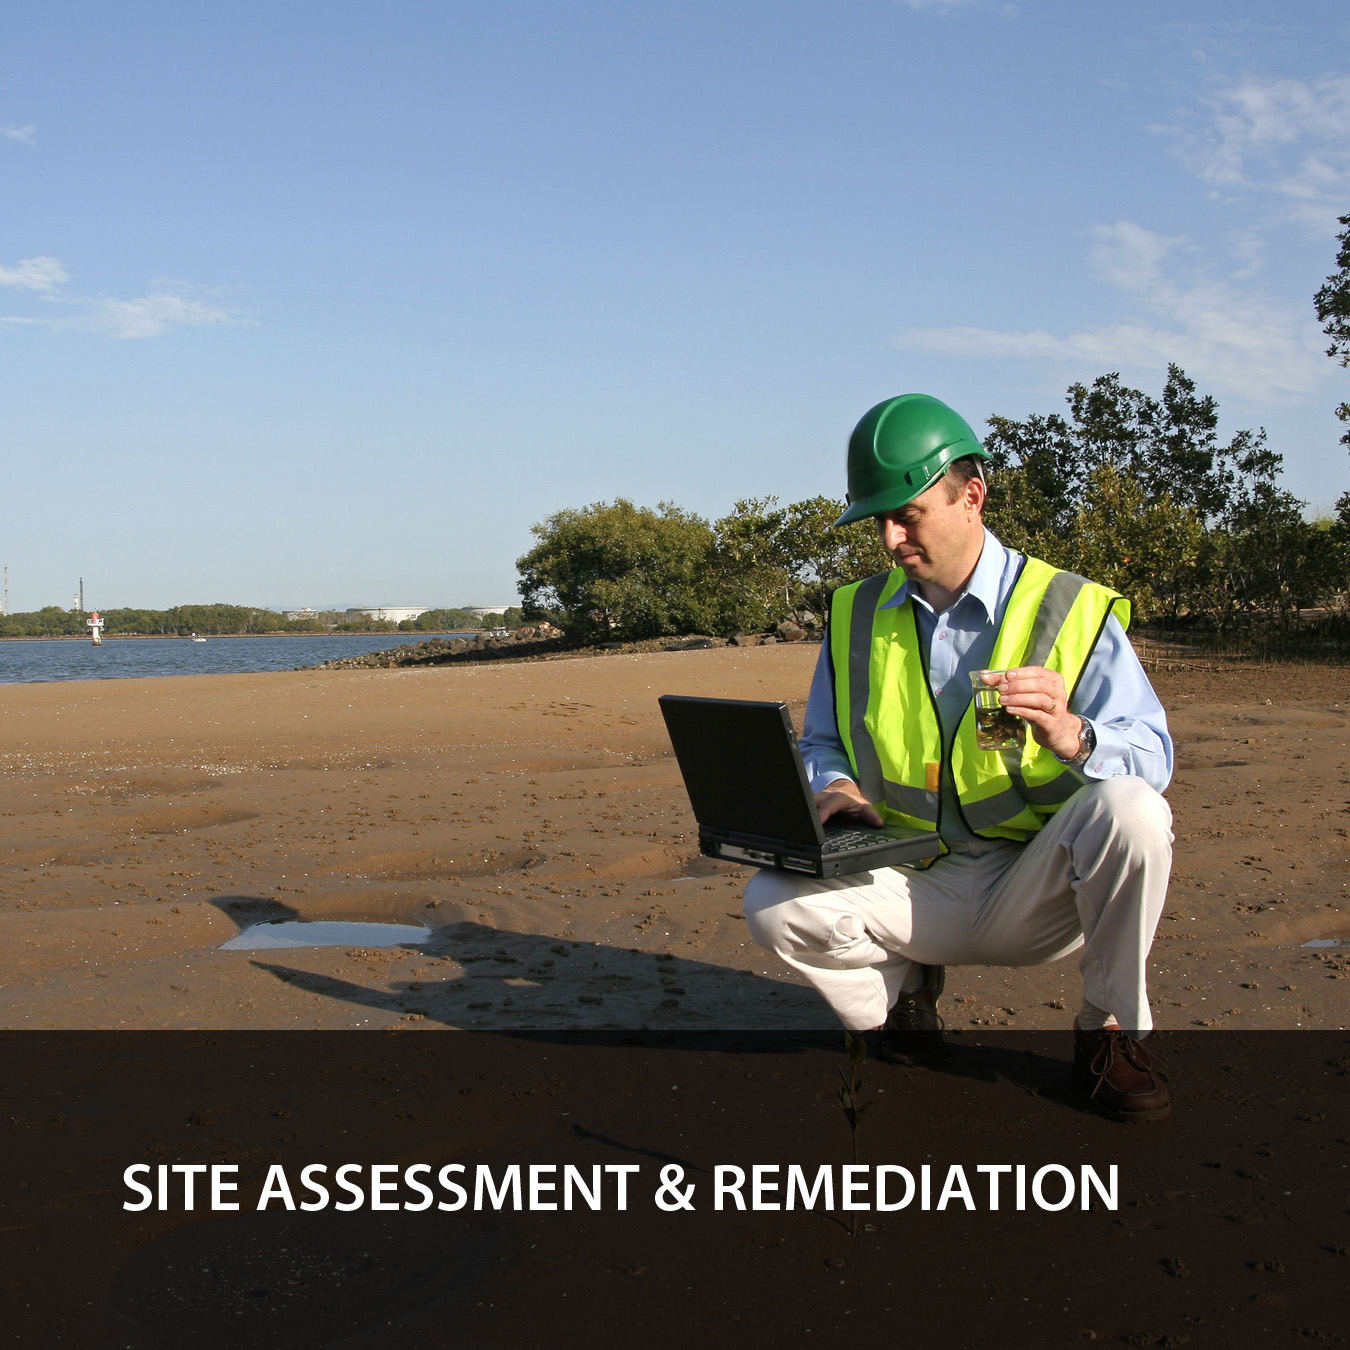 Site Assessment & Remediation